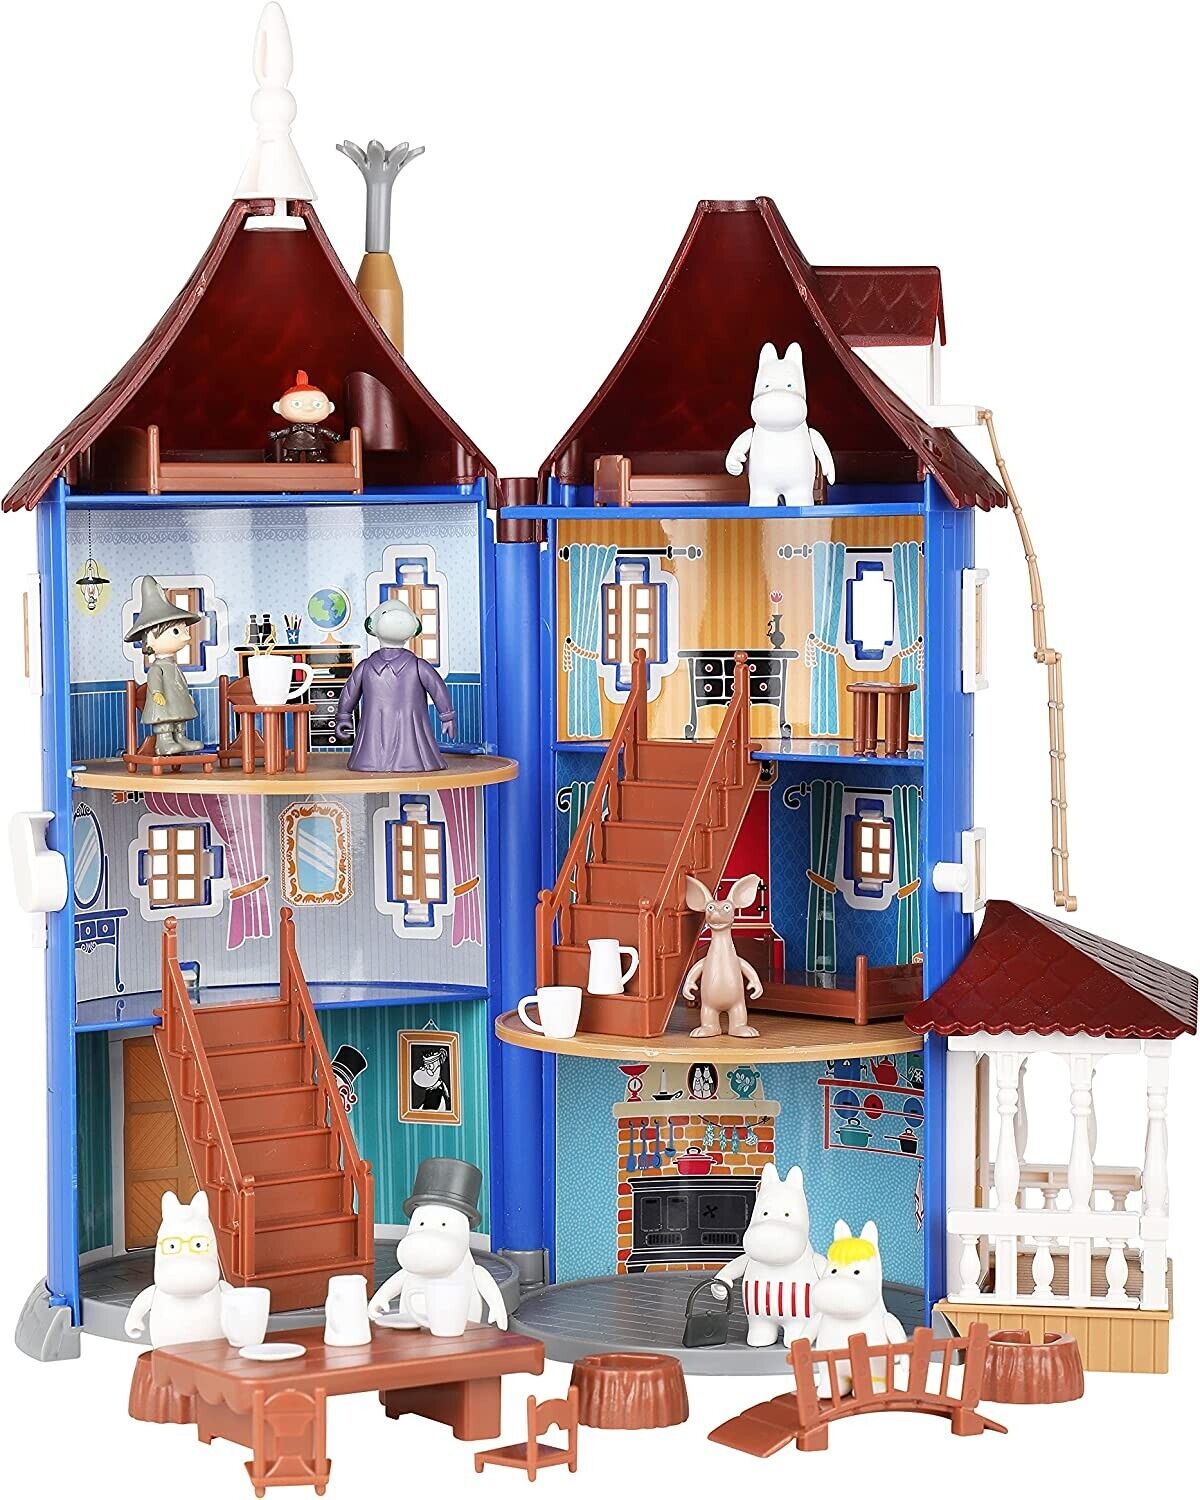 Martinex Moomin Miniature Dollhouse Plastic Toy House With 9 Figures